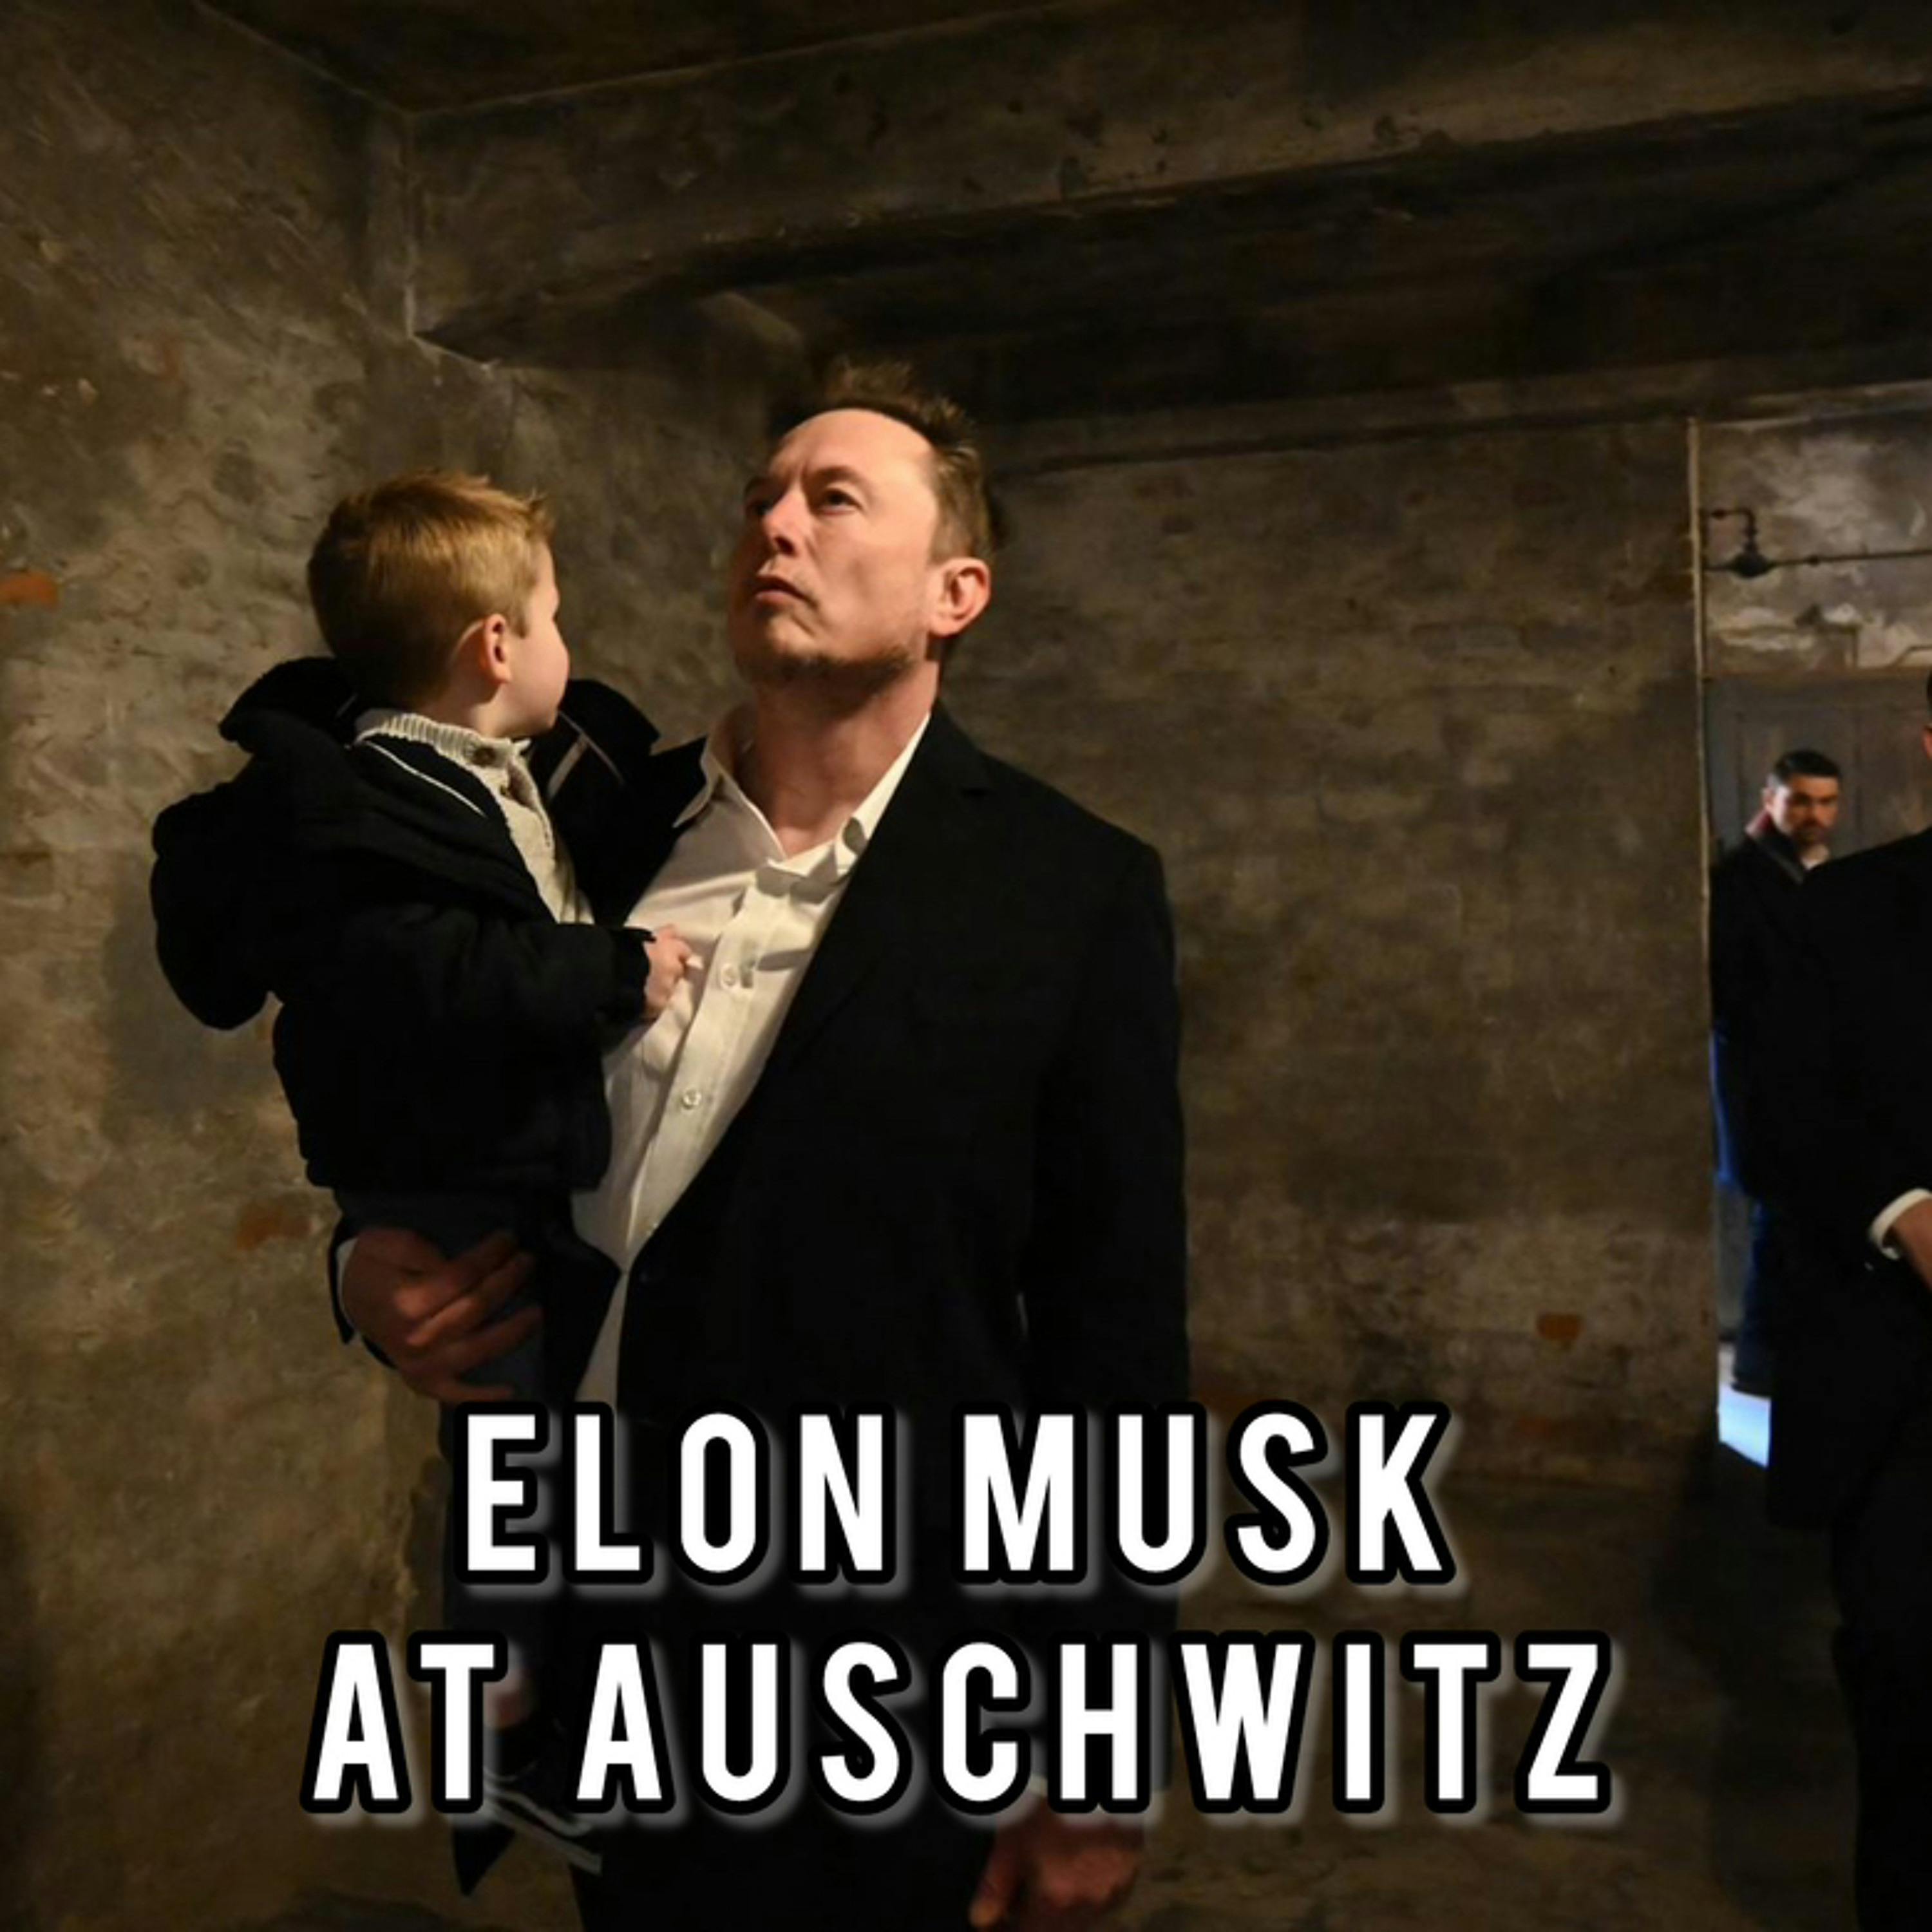 EXTRA: Elon Musk and Ben Shapiro return from Auschwitz with their first impressions